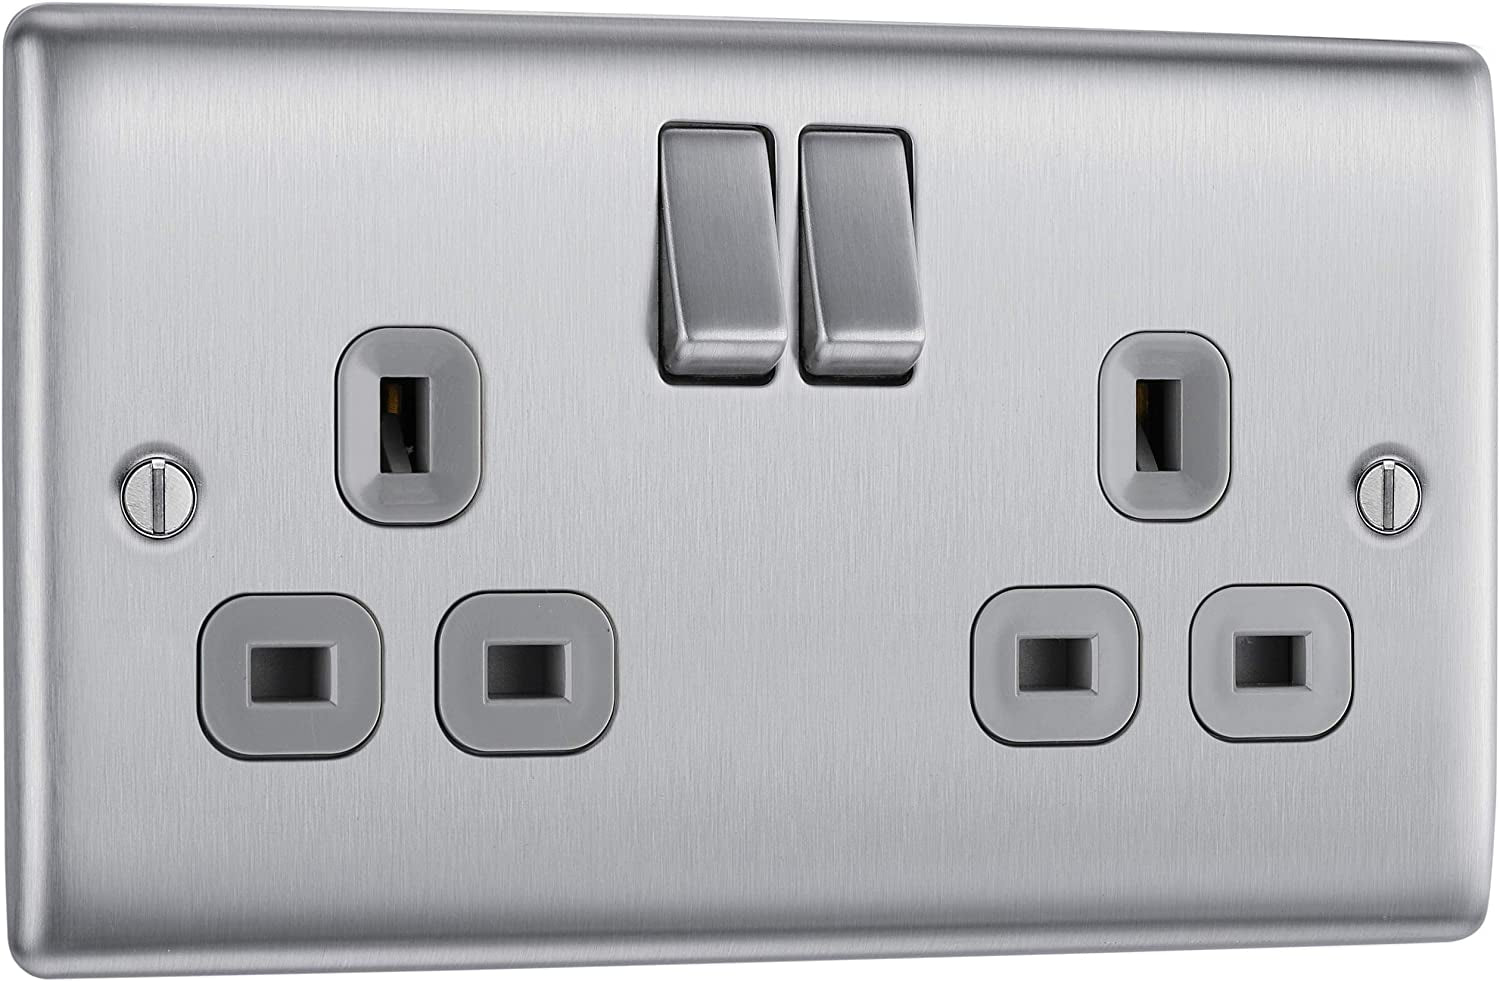 BG Electrical NBS22G-01 Double Switched Power Socket, Brushed Steel, 13 Amp